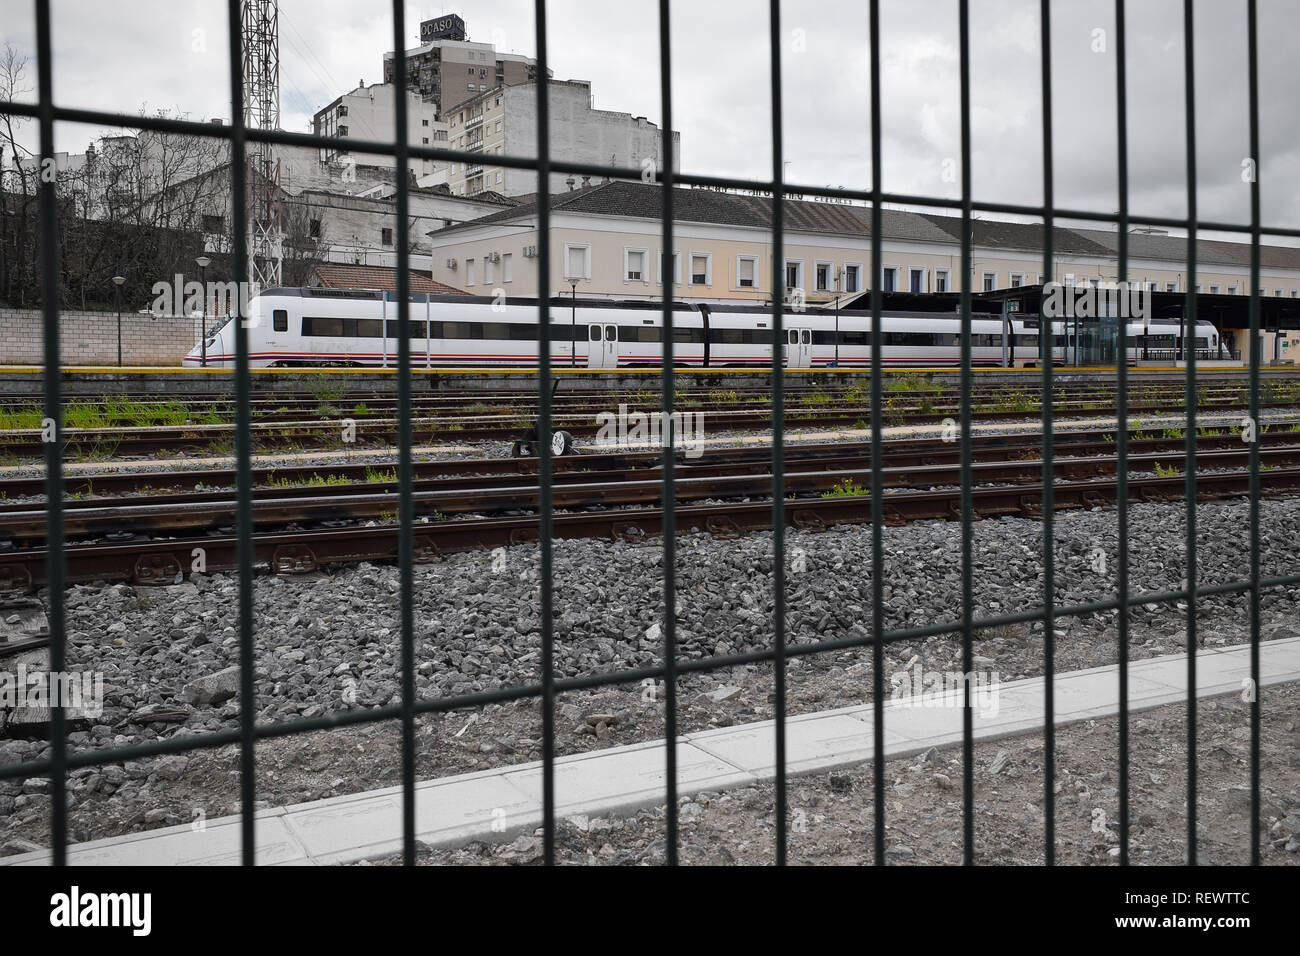 The railway in the region of Extremadura, Spain, has serious problems. Shot shows the train station of Mérida. It shows a damaged non-functional Renfe. Stock Photo